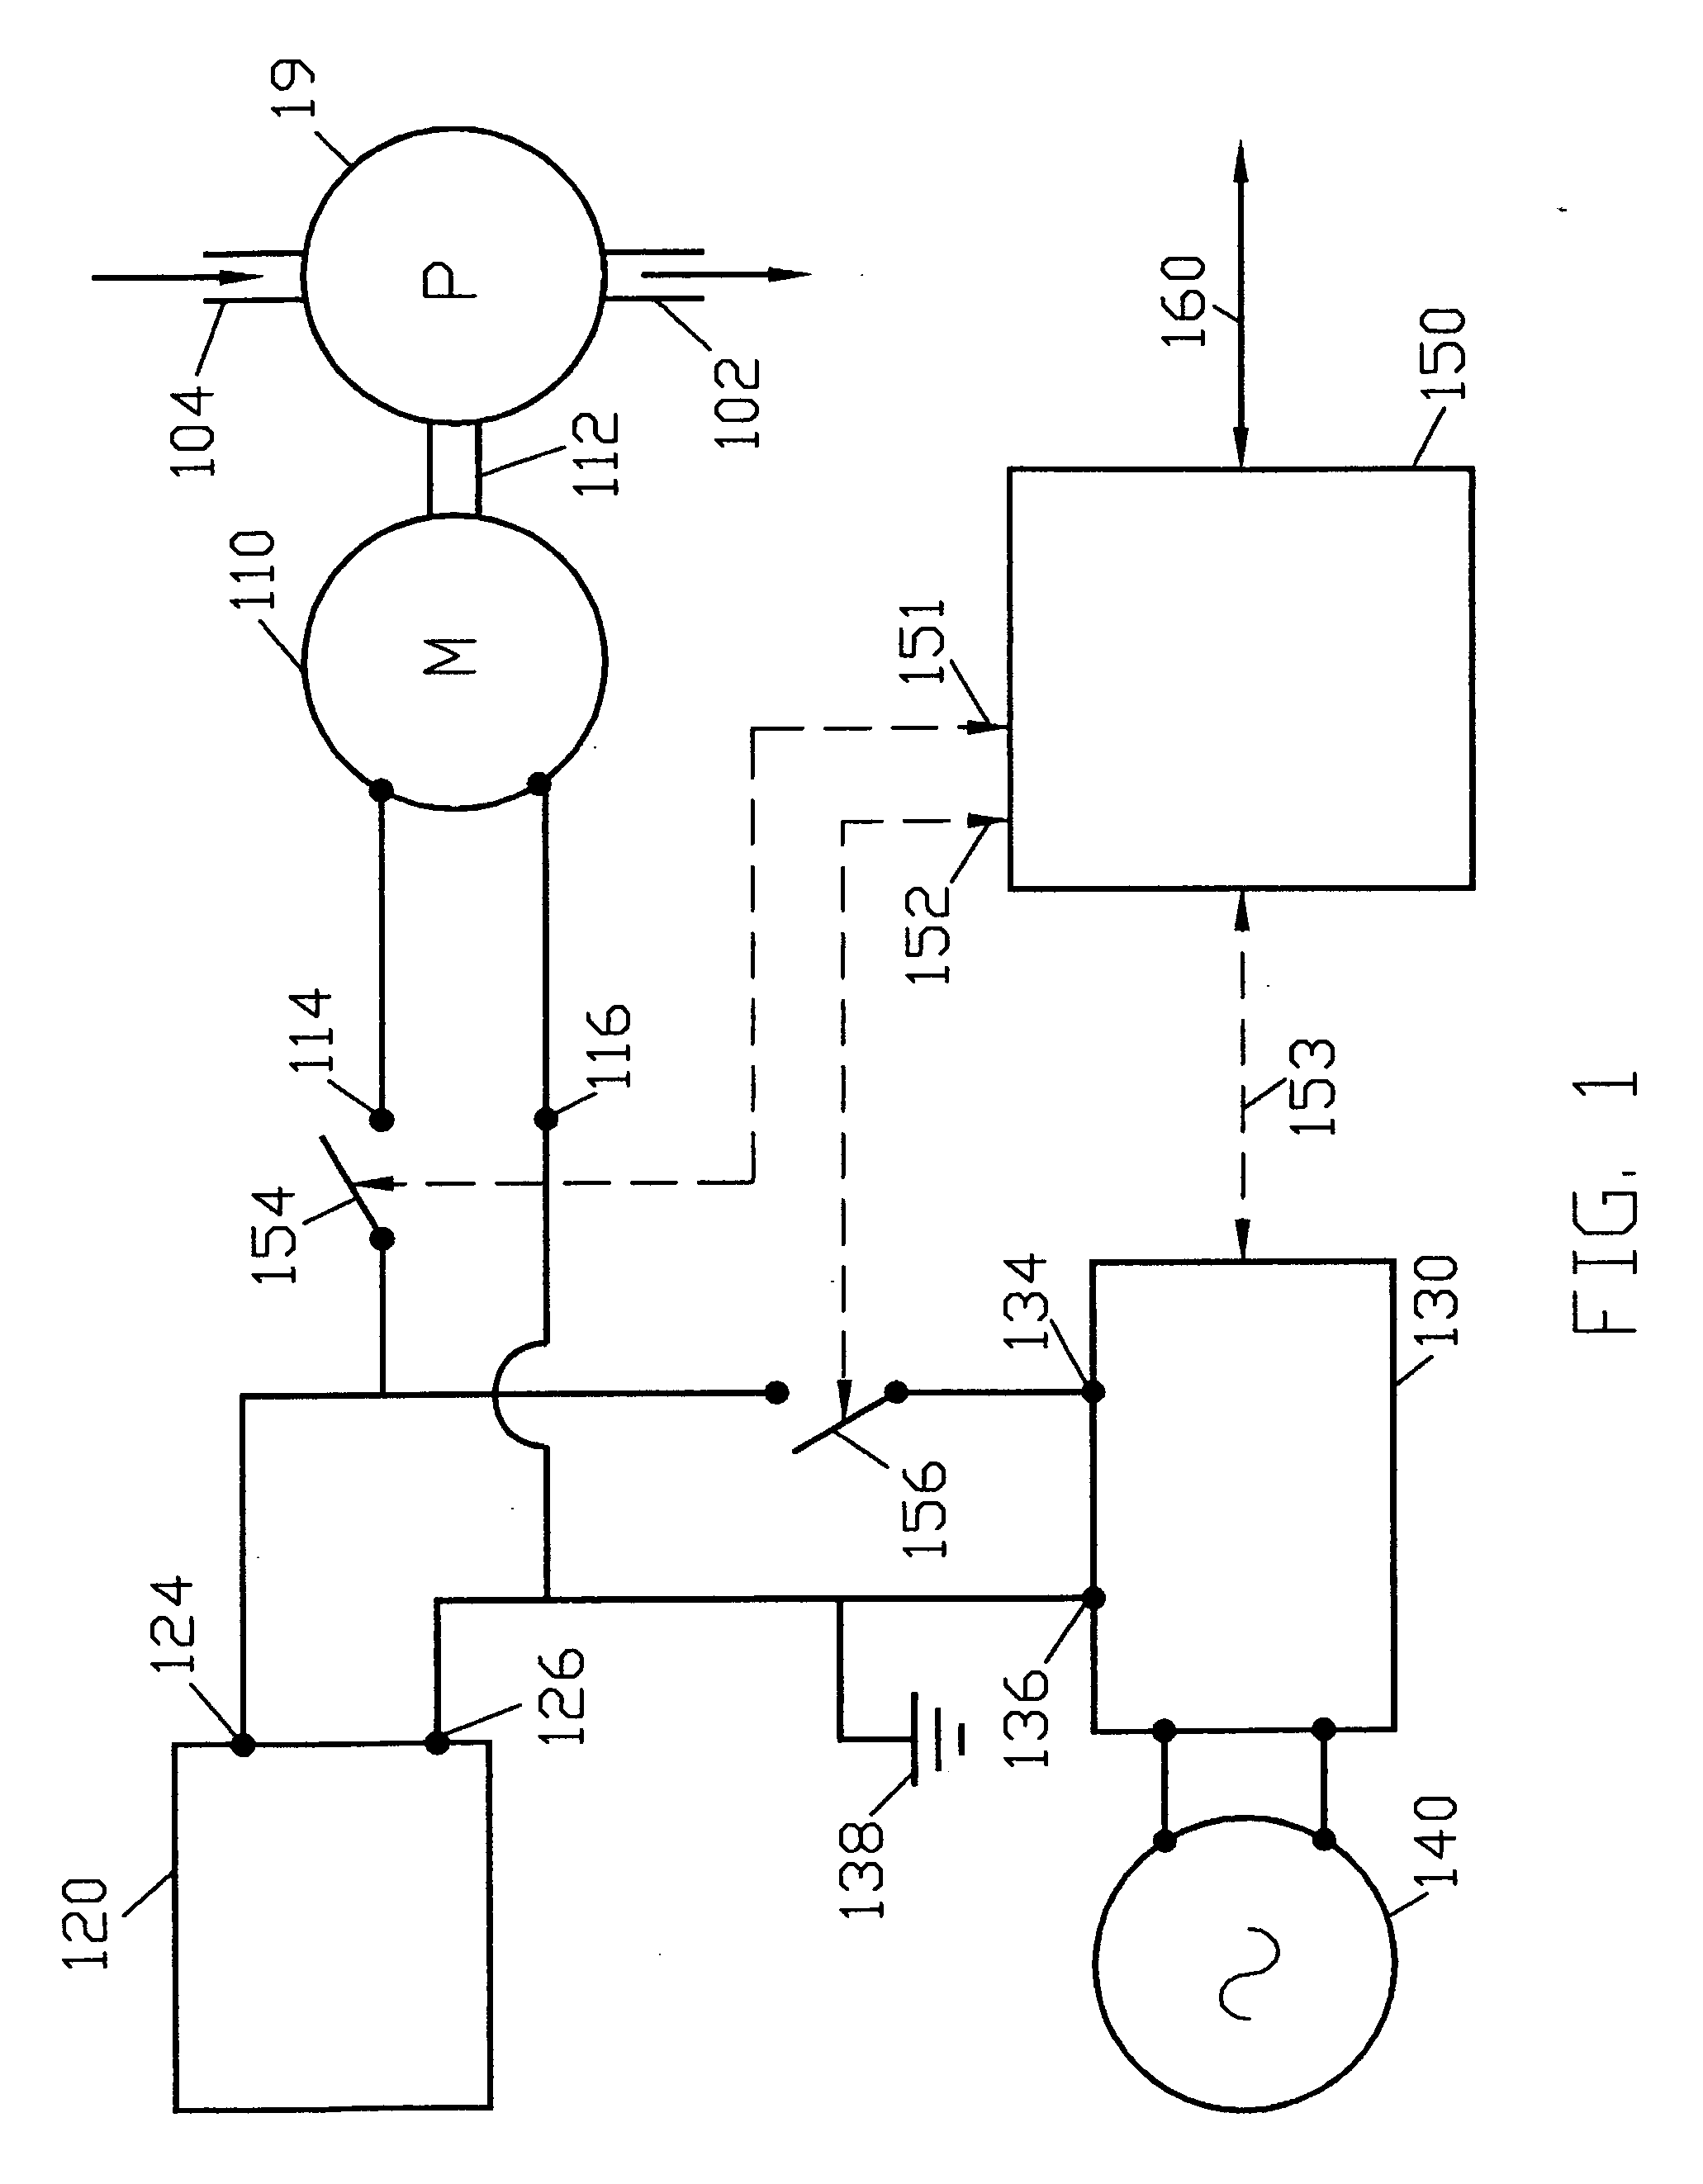 Battery-powered air handling system for subsurface aeration